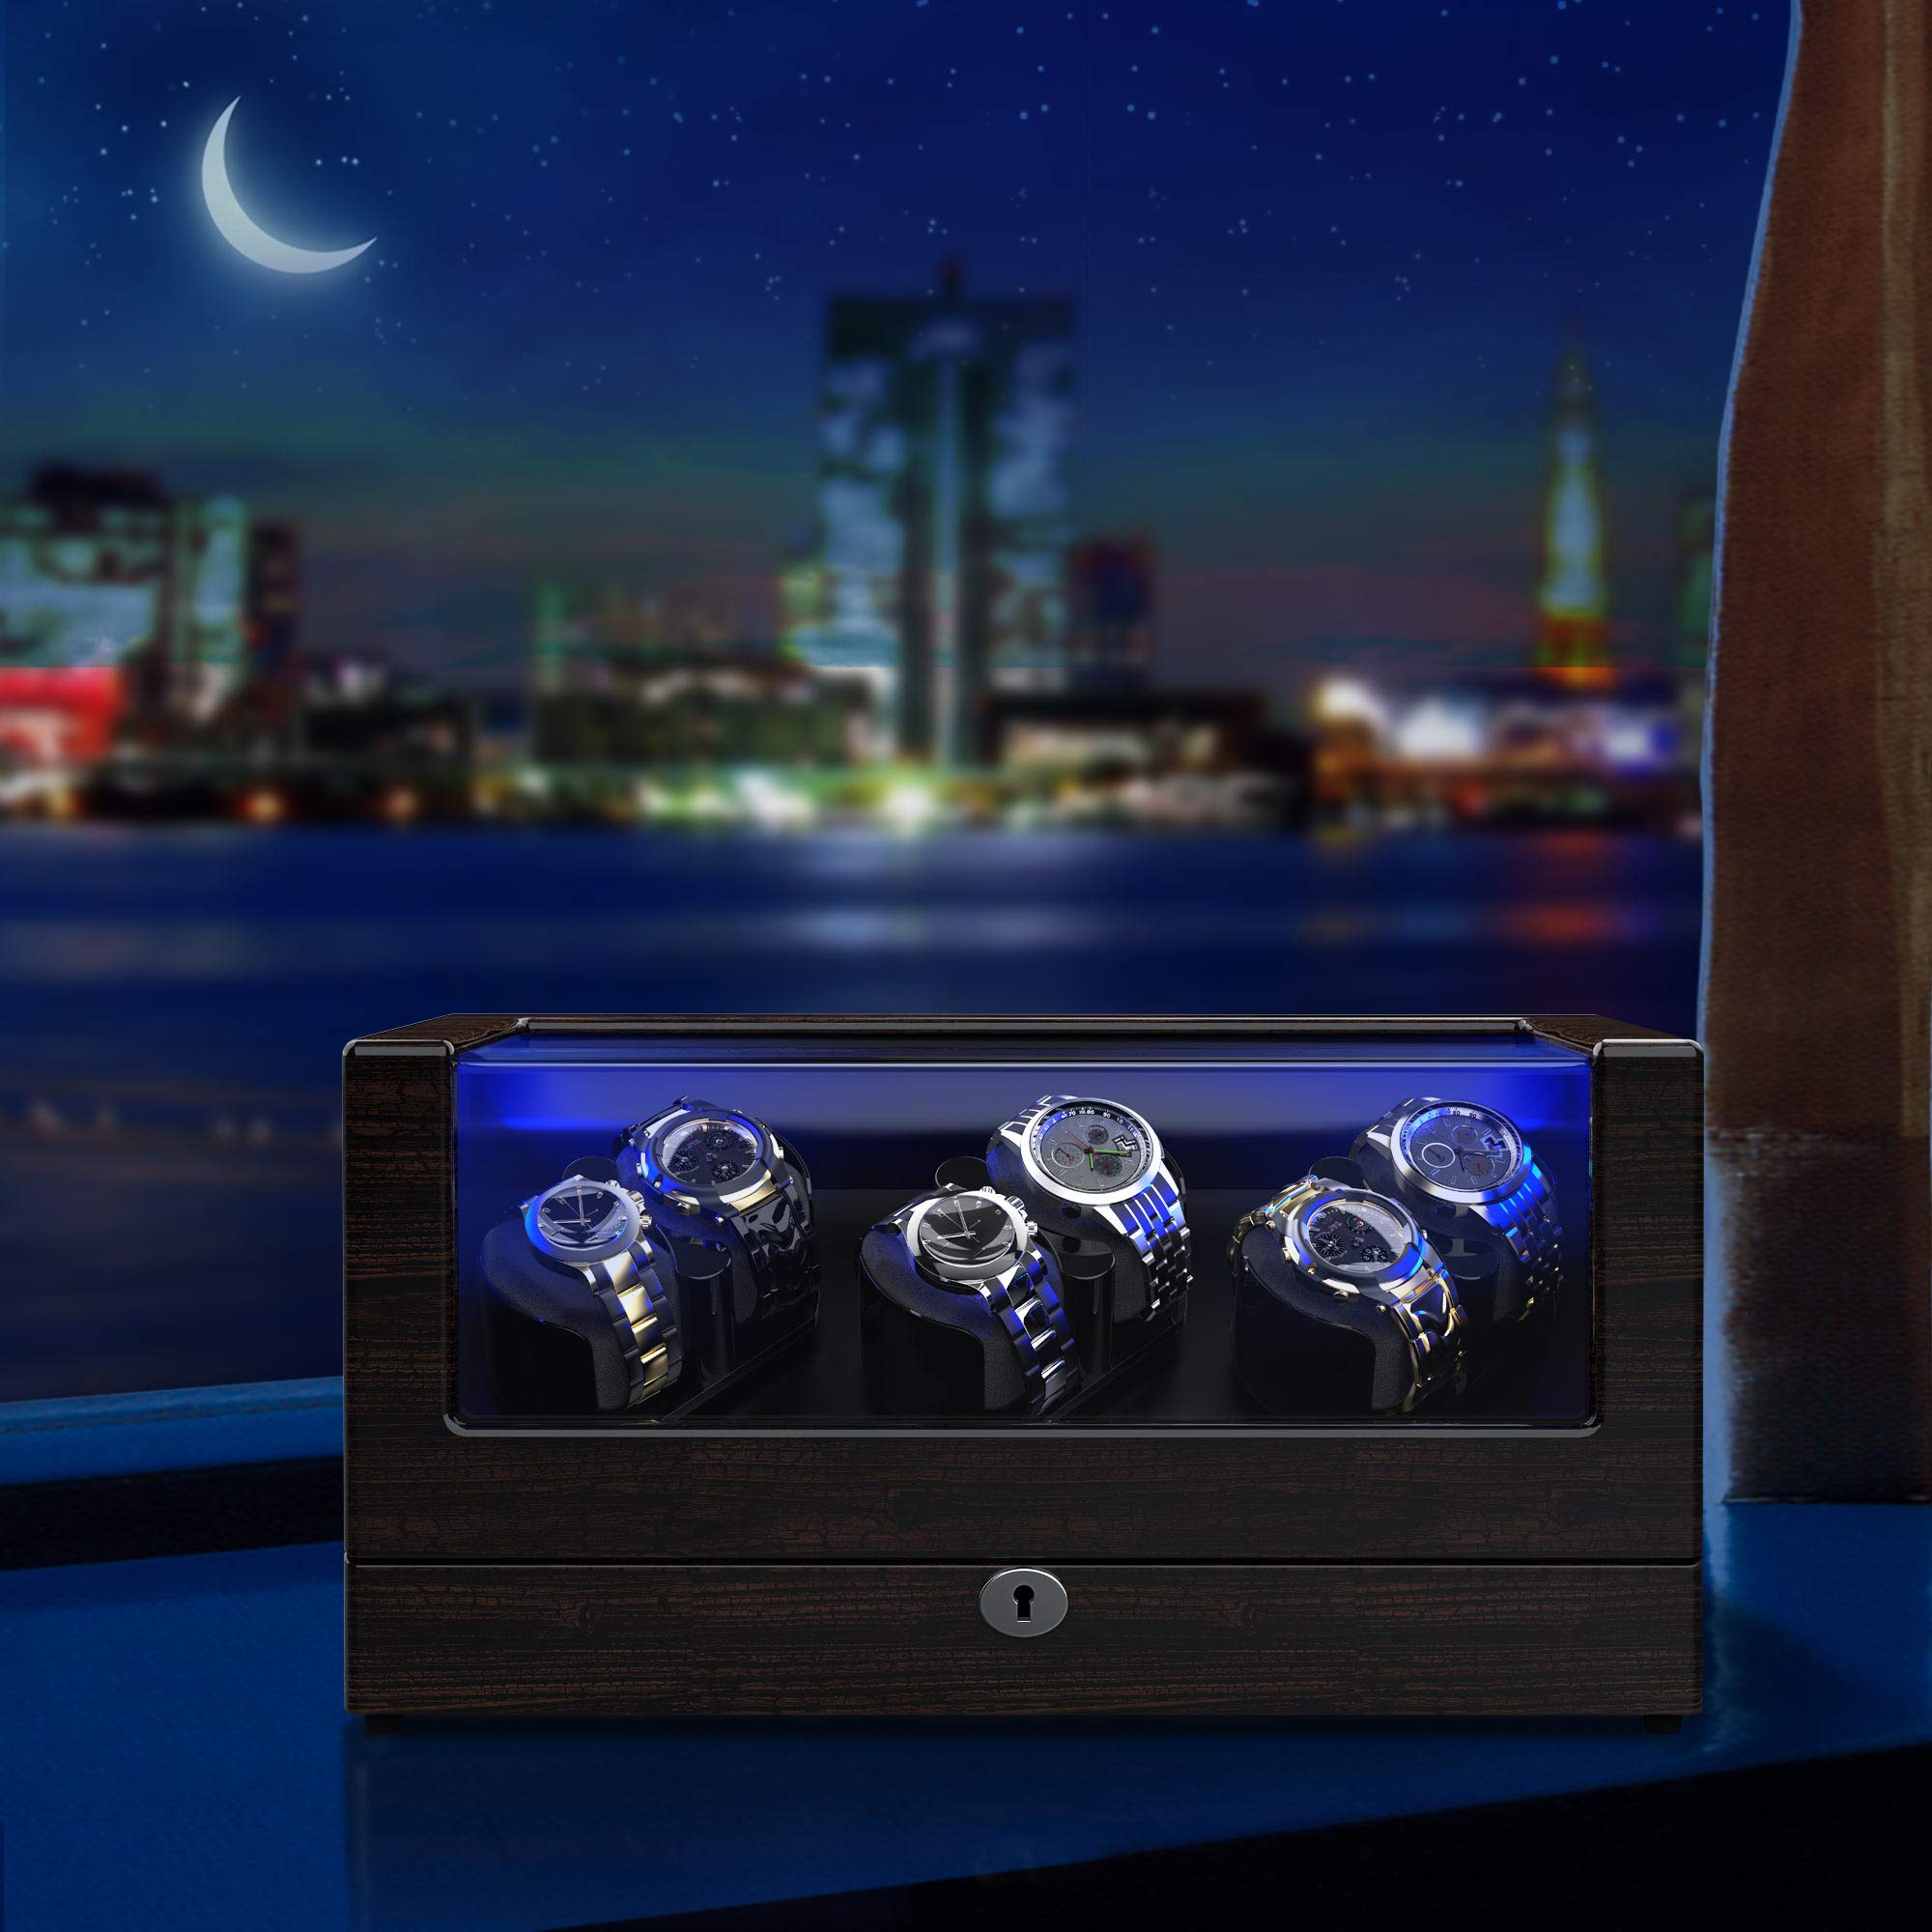 TRIPLE TREE Watch Winder, for Rolex Automatic Watches with Flexible Watch Pillows, Wooden Shell, Powered by Japanese Motor, Built-in LED Illuminated